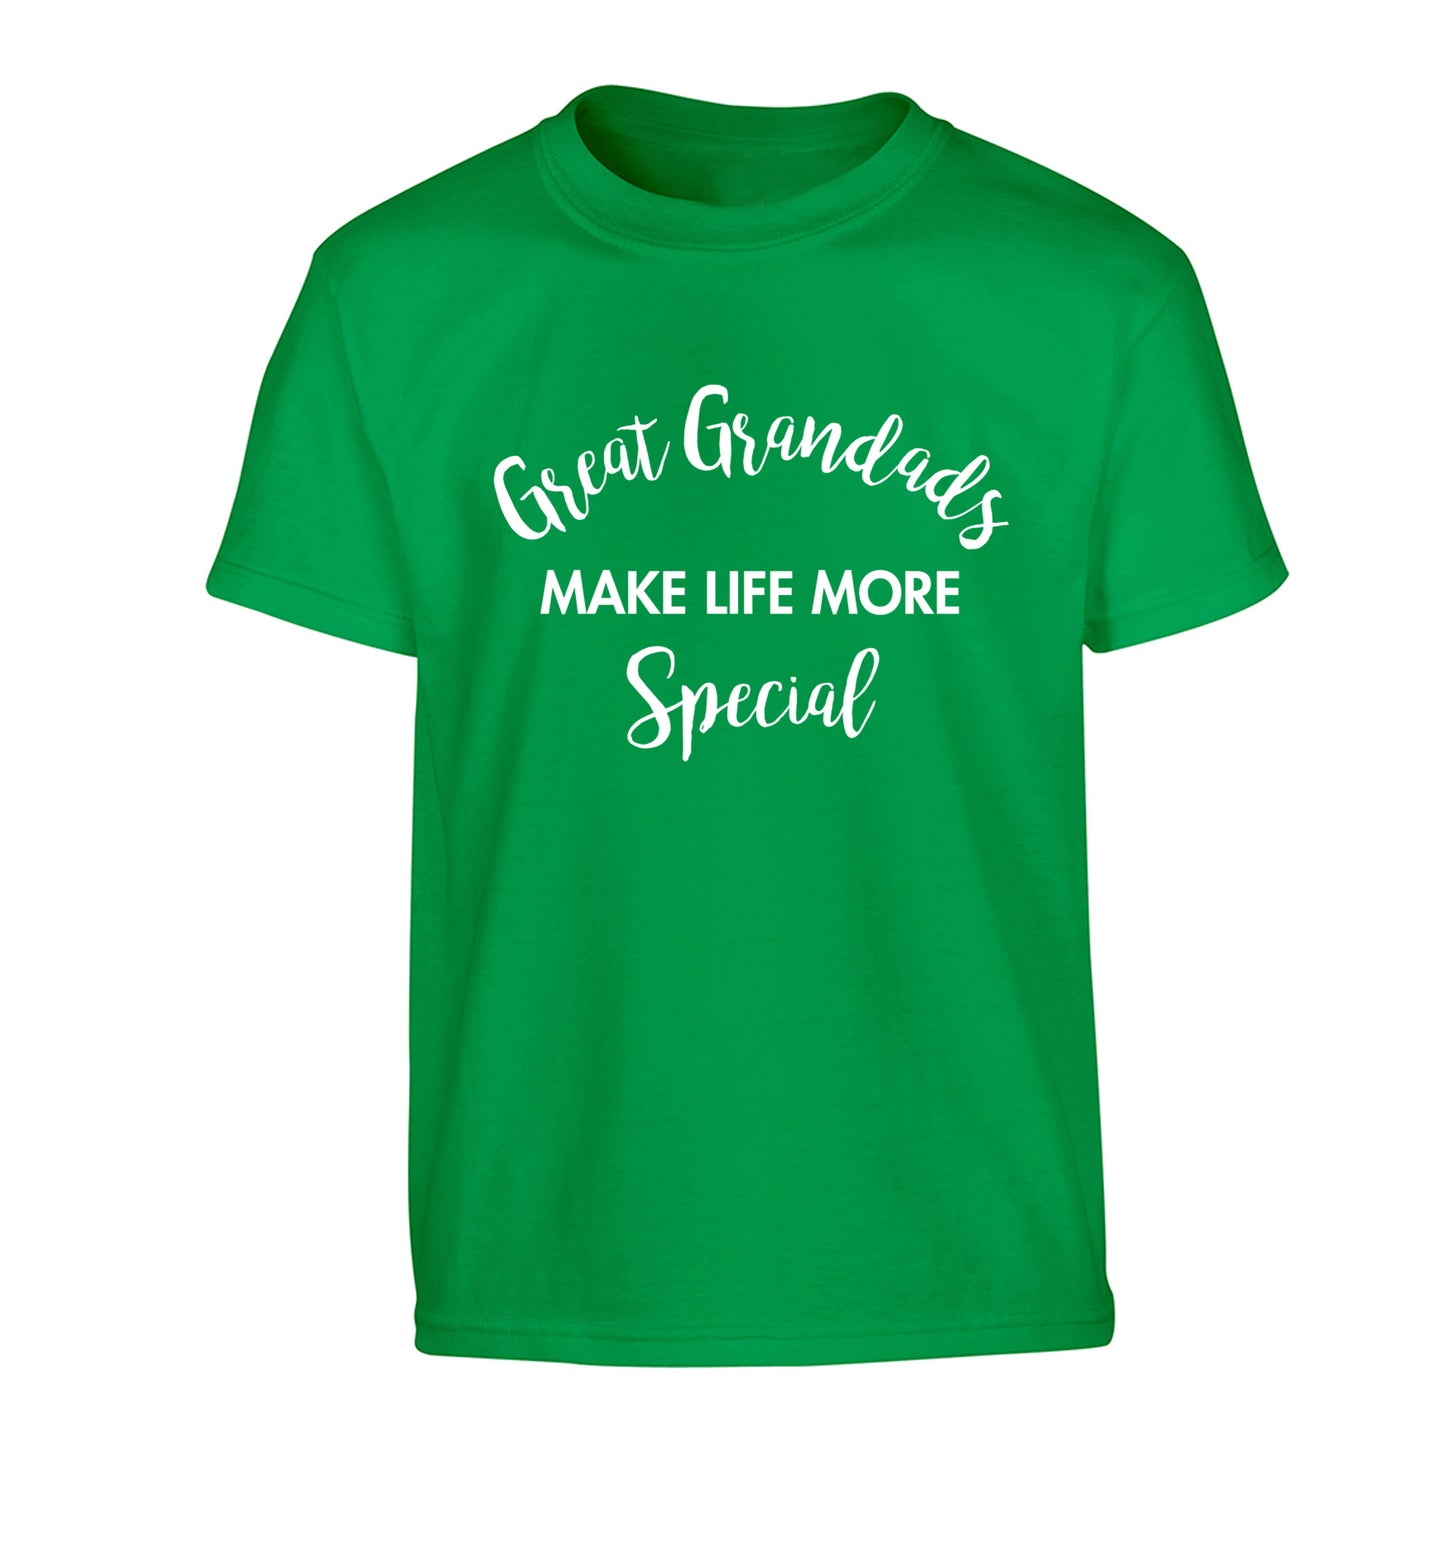 Great Grandads make life more special Children's green Tshirt 12-14 Years